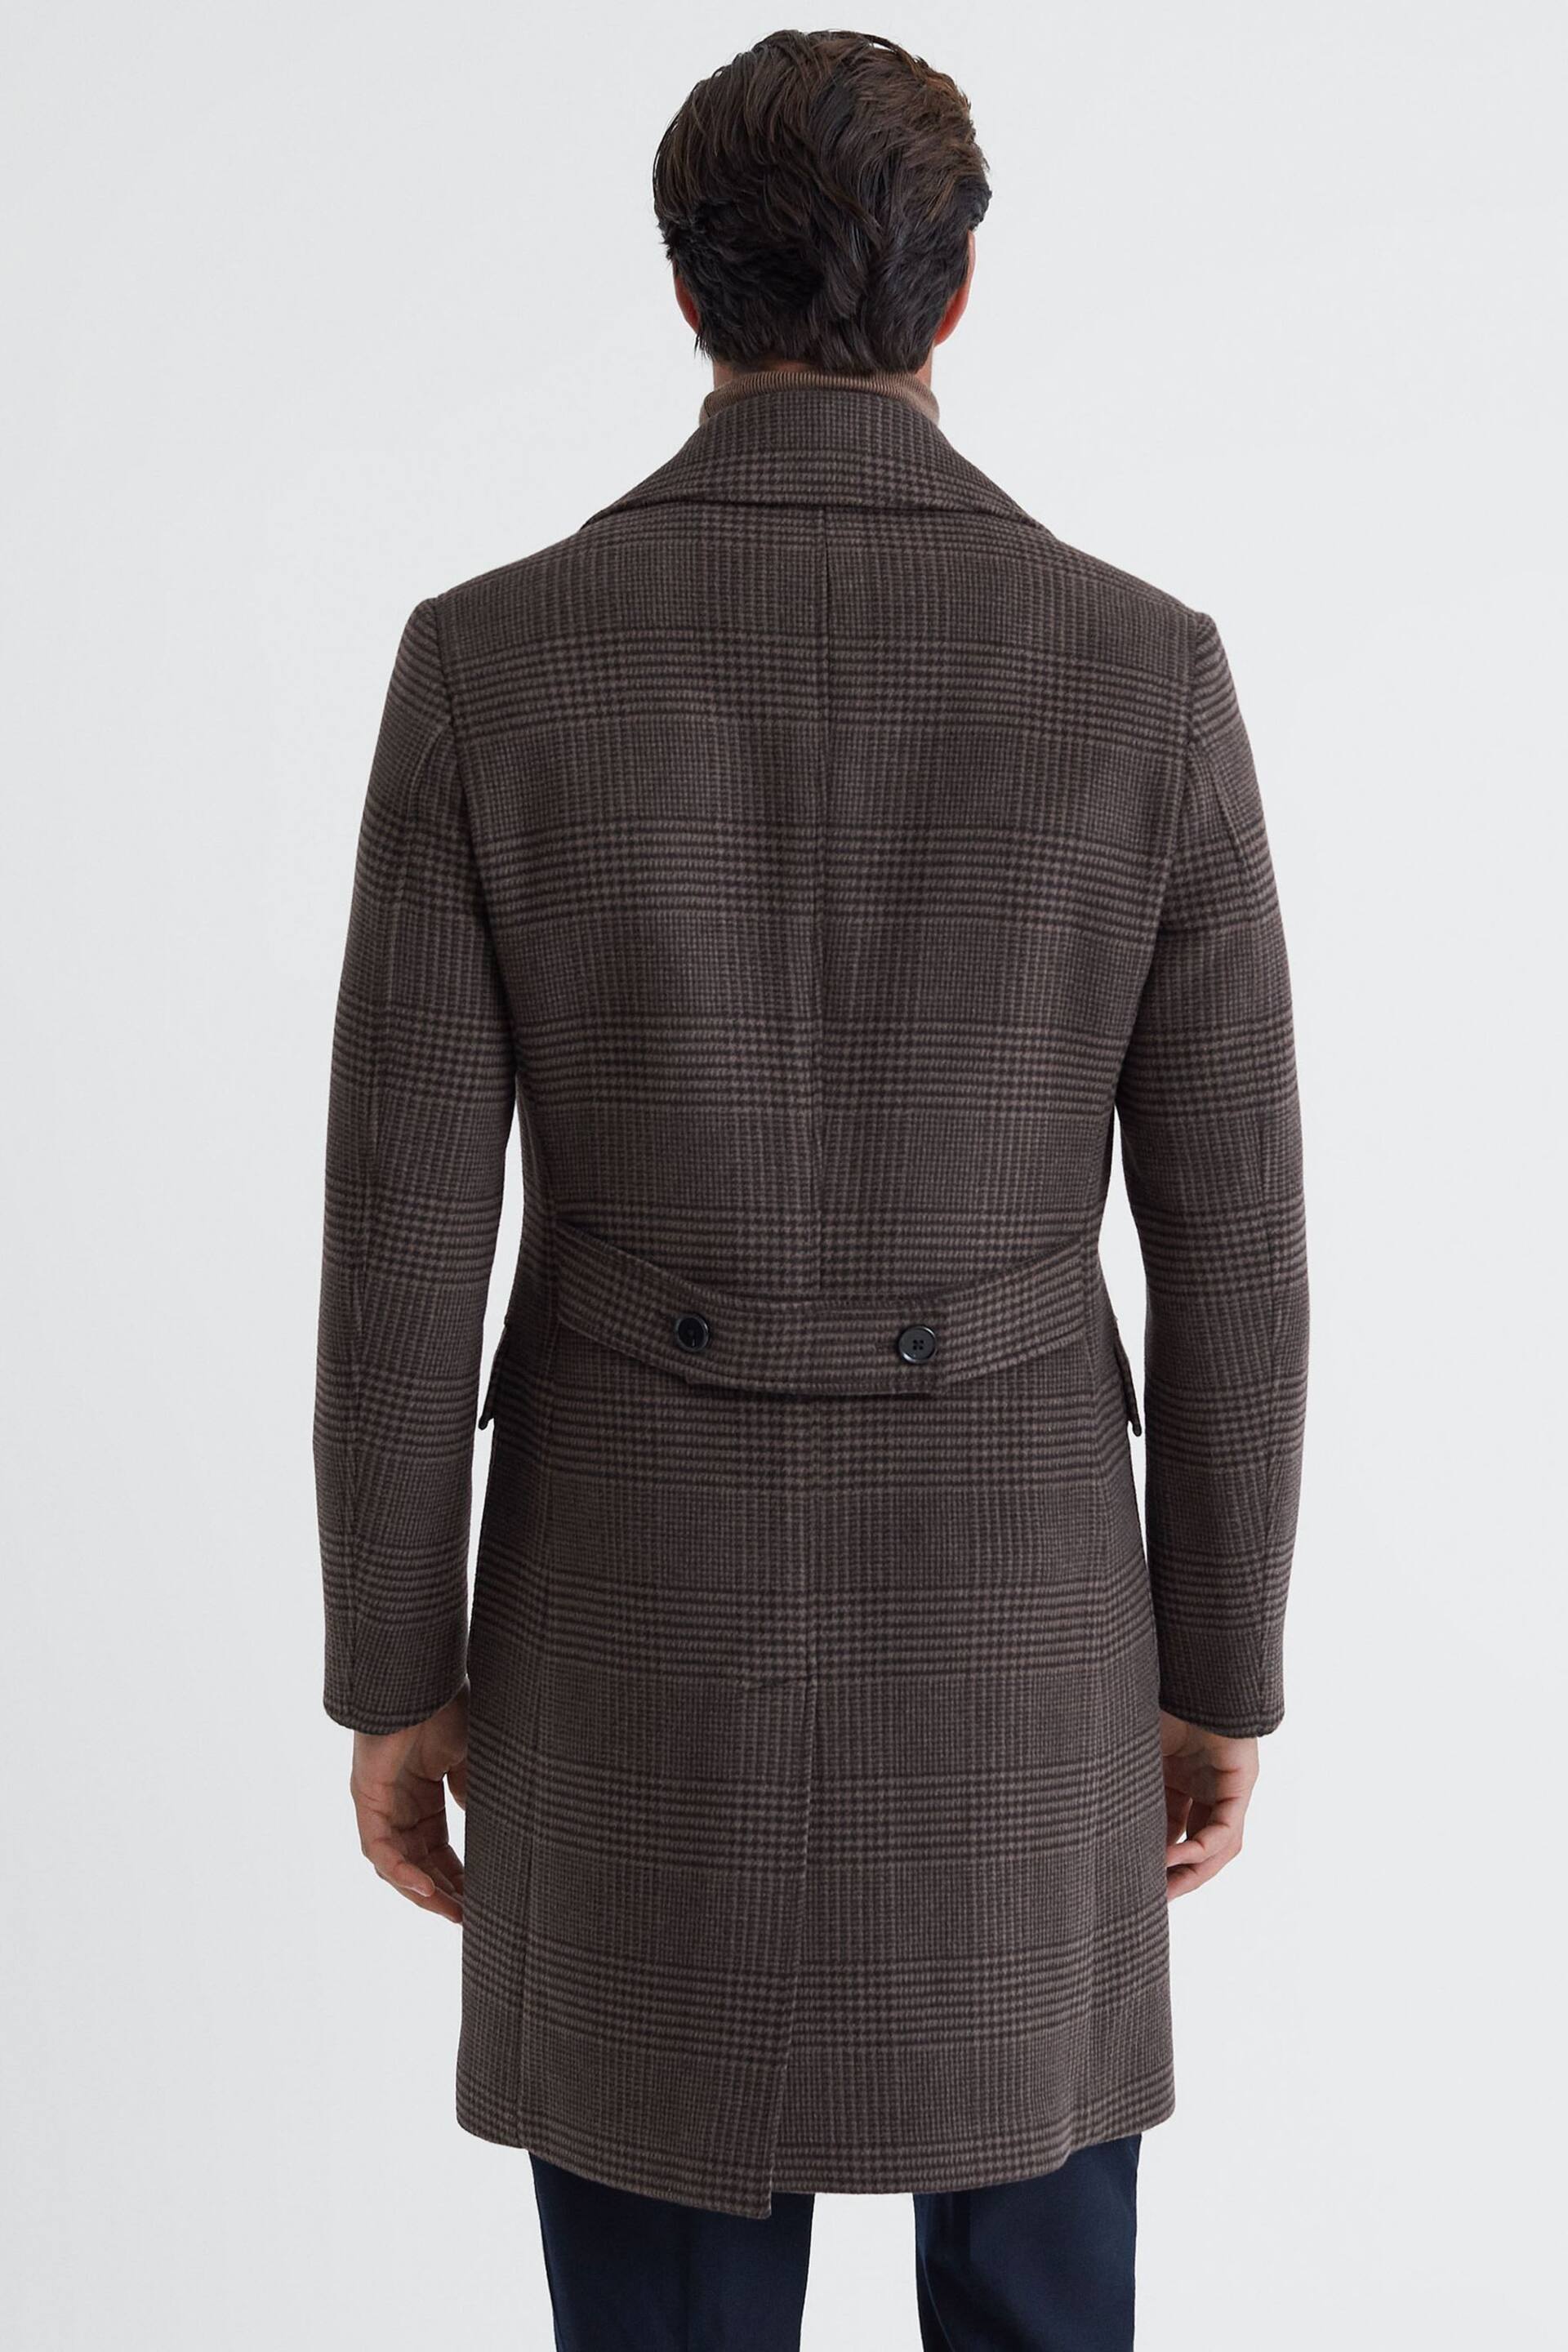 Reiss Brown Date Wool Check Double Breasted Coat - Image 4 of 5